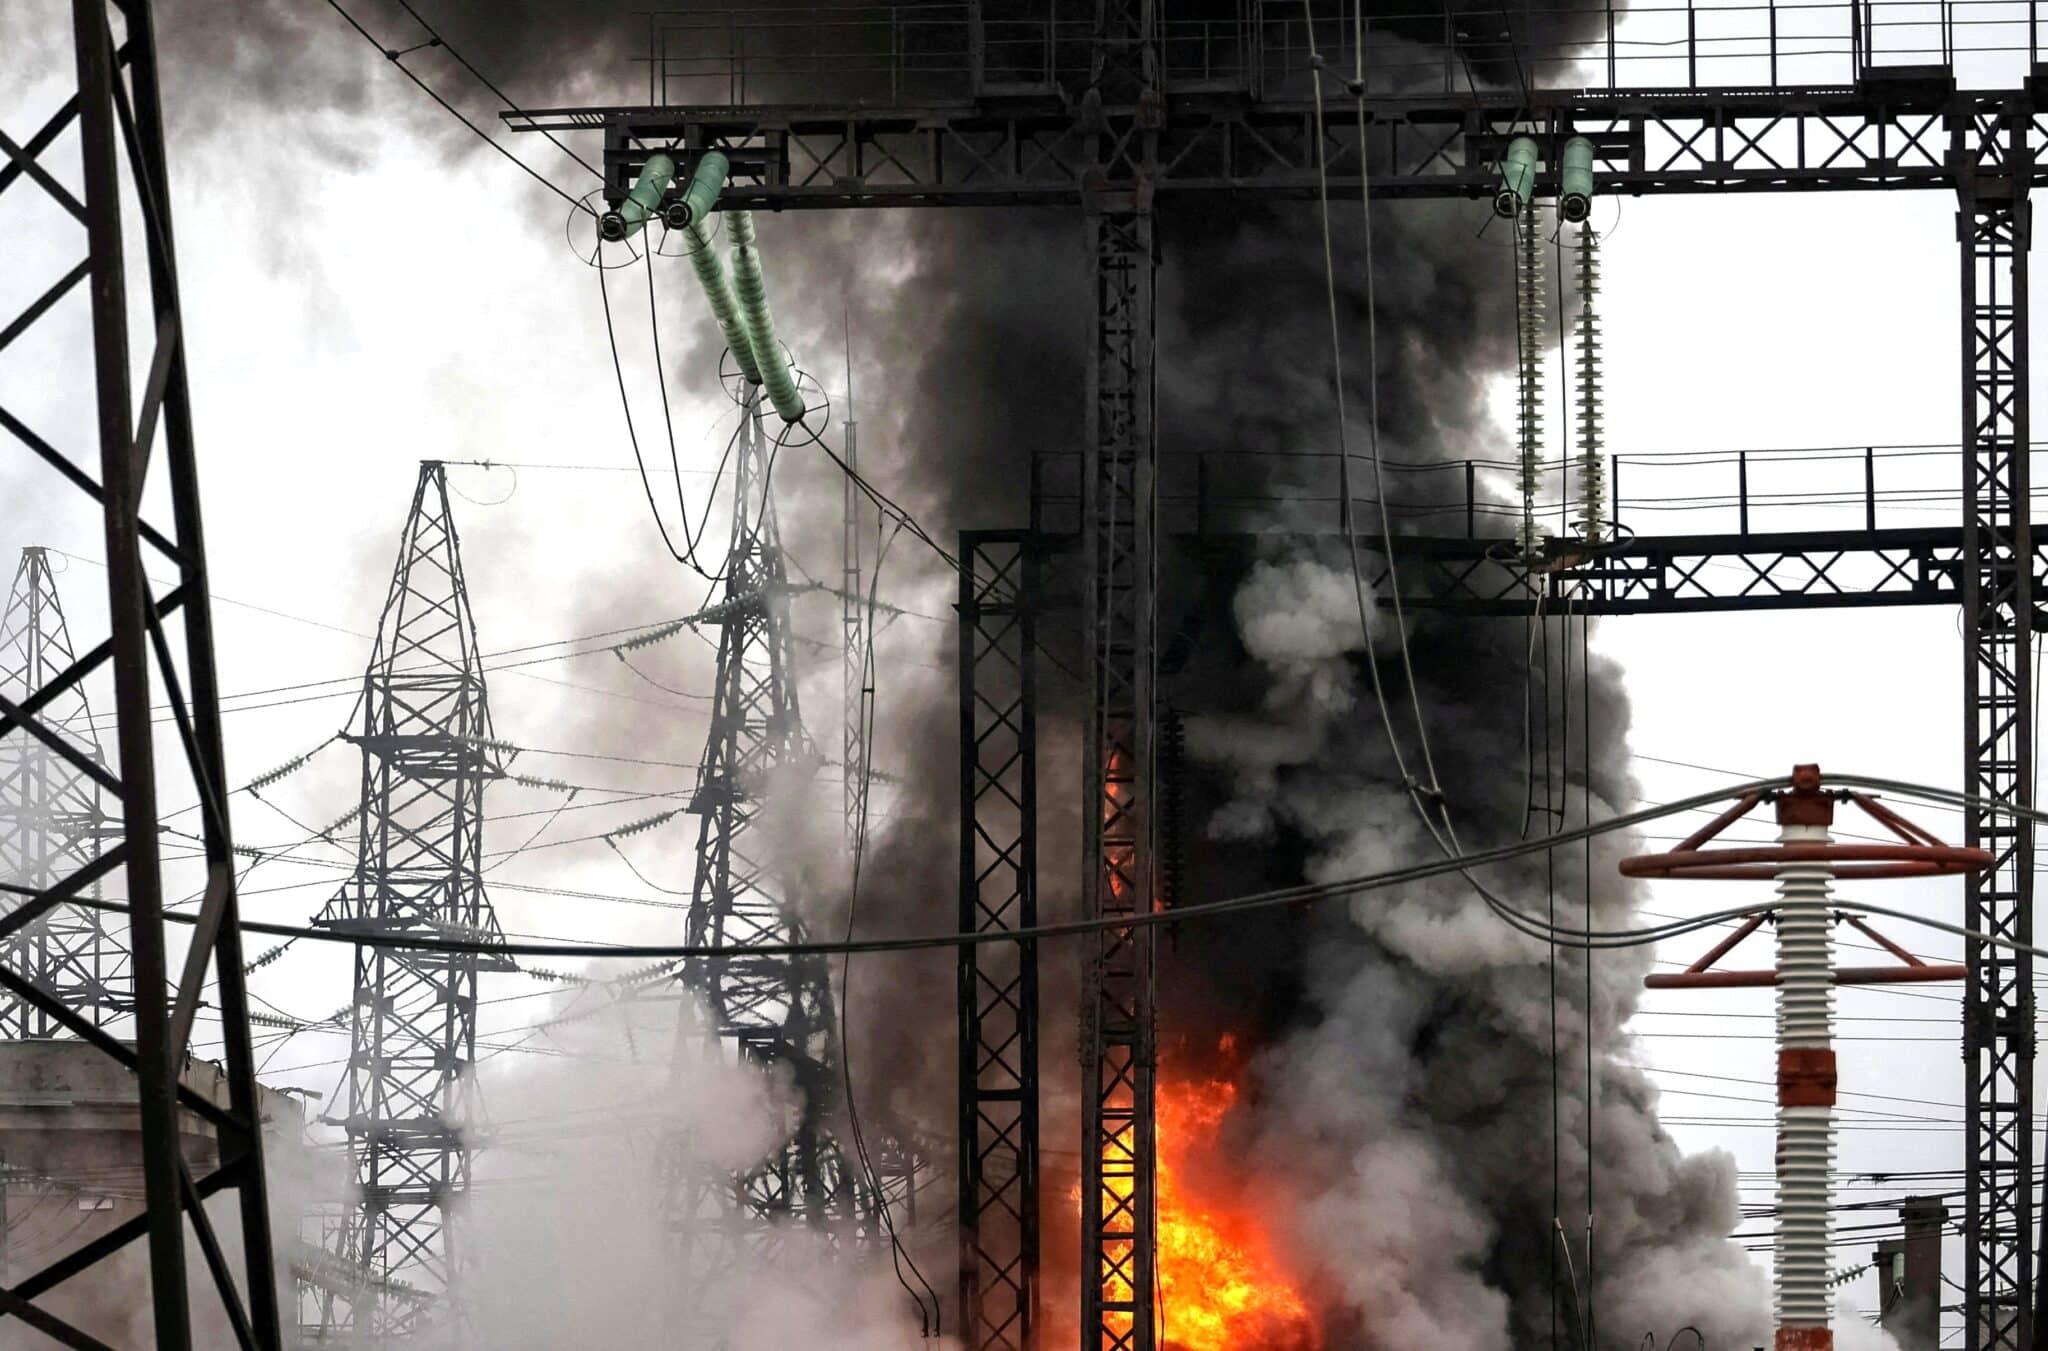 Smoke and flames are seen near a high-voltage line at a site of a Russian airstrike, outside Kharkiv, Ukraine, March 22, 2024. Fifteen U.S.-based religious leaders, including Archbishop Timothy P. Broglio and Metropolitan Archbishop Borys A. Gudziak, have condemned Russia's March 21-22 attacks on Ukraine's energy grid as "war crimes." (OSV News photo/Sofiia Gatilova, Reuters)